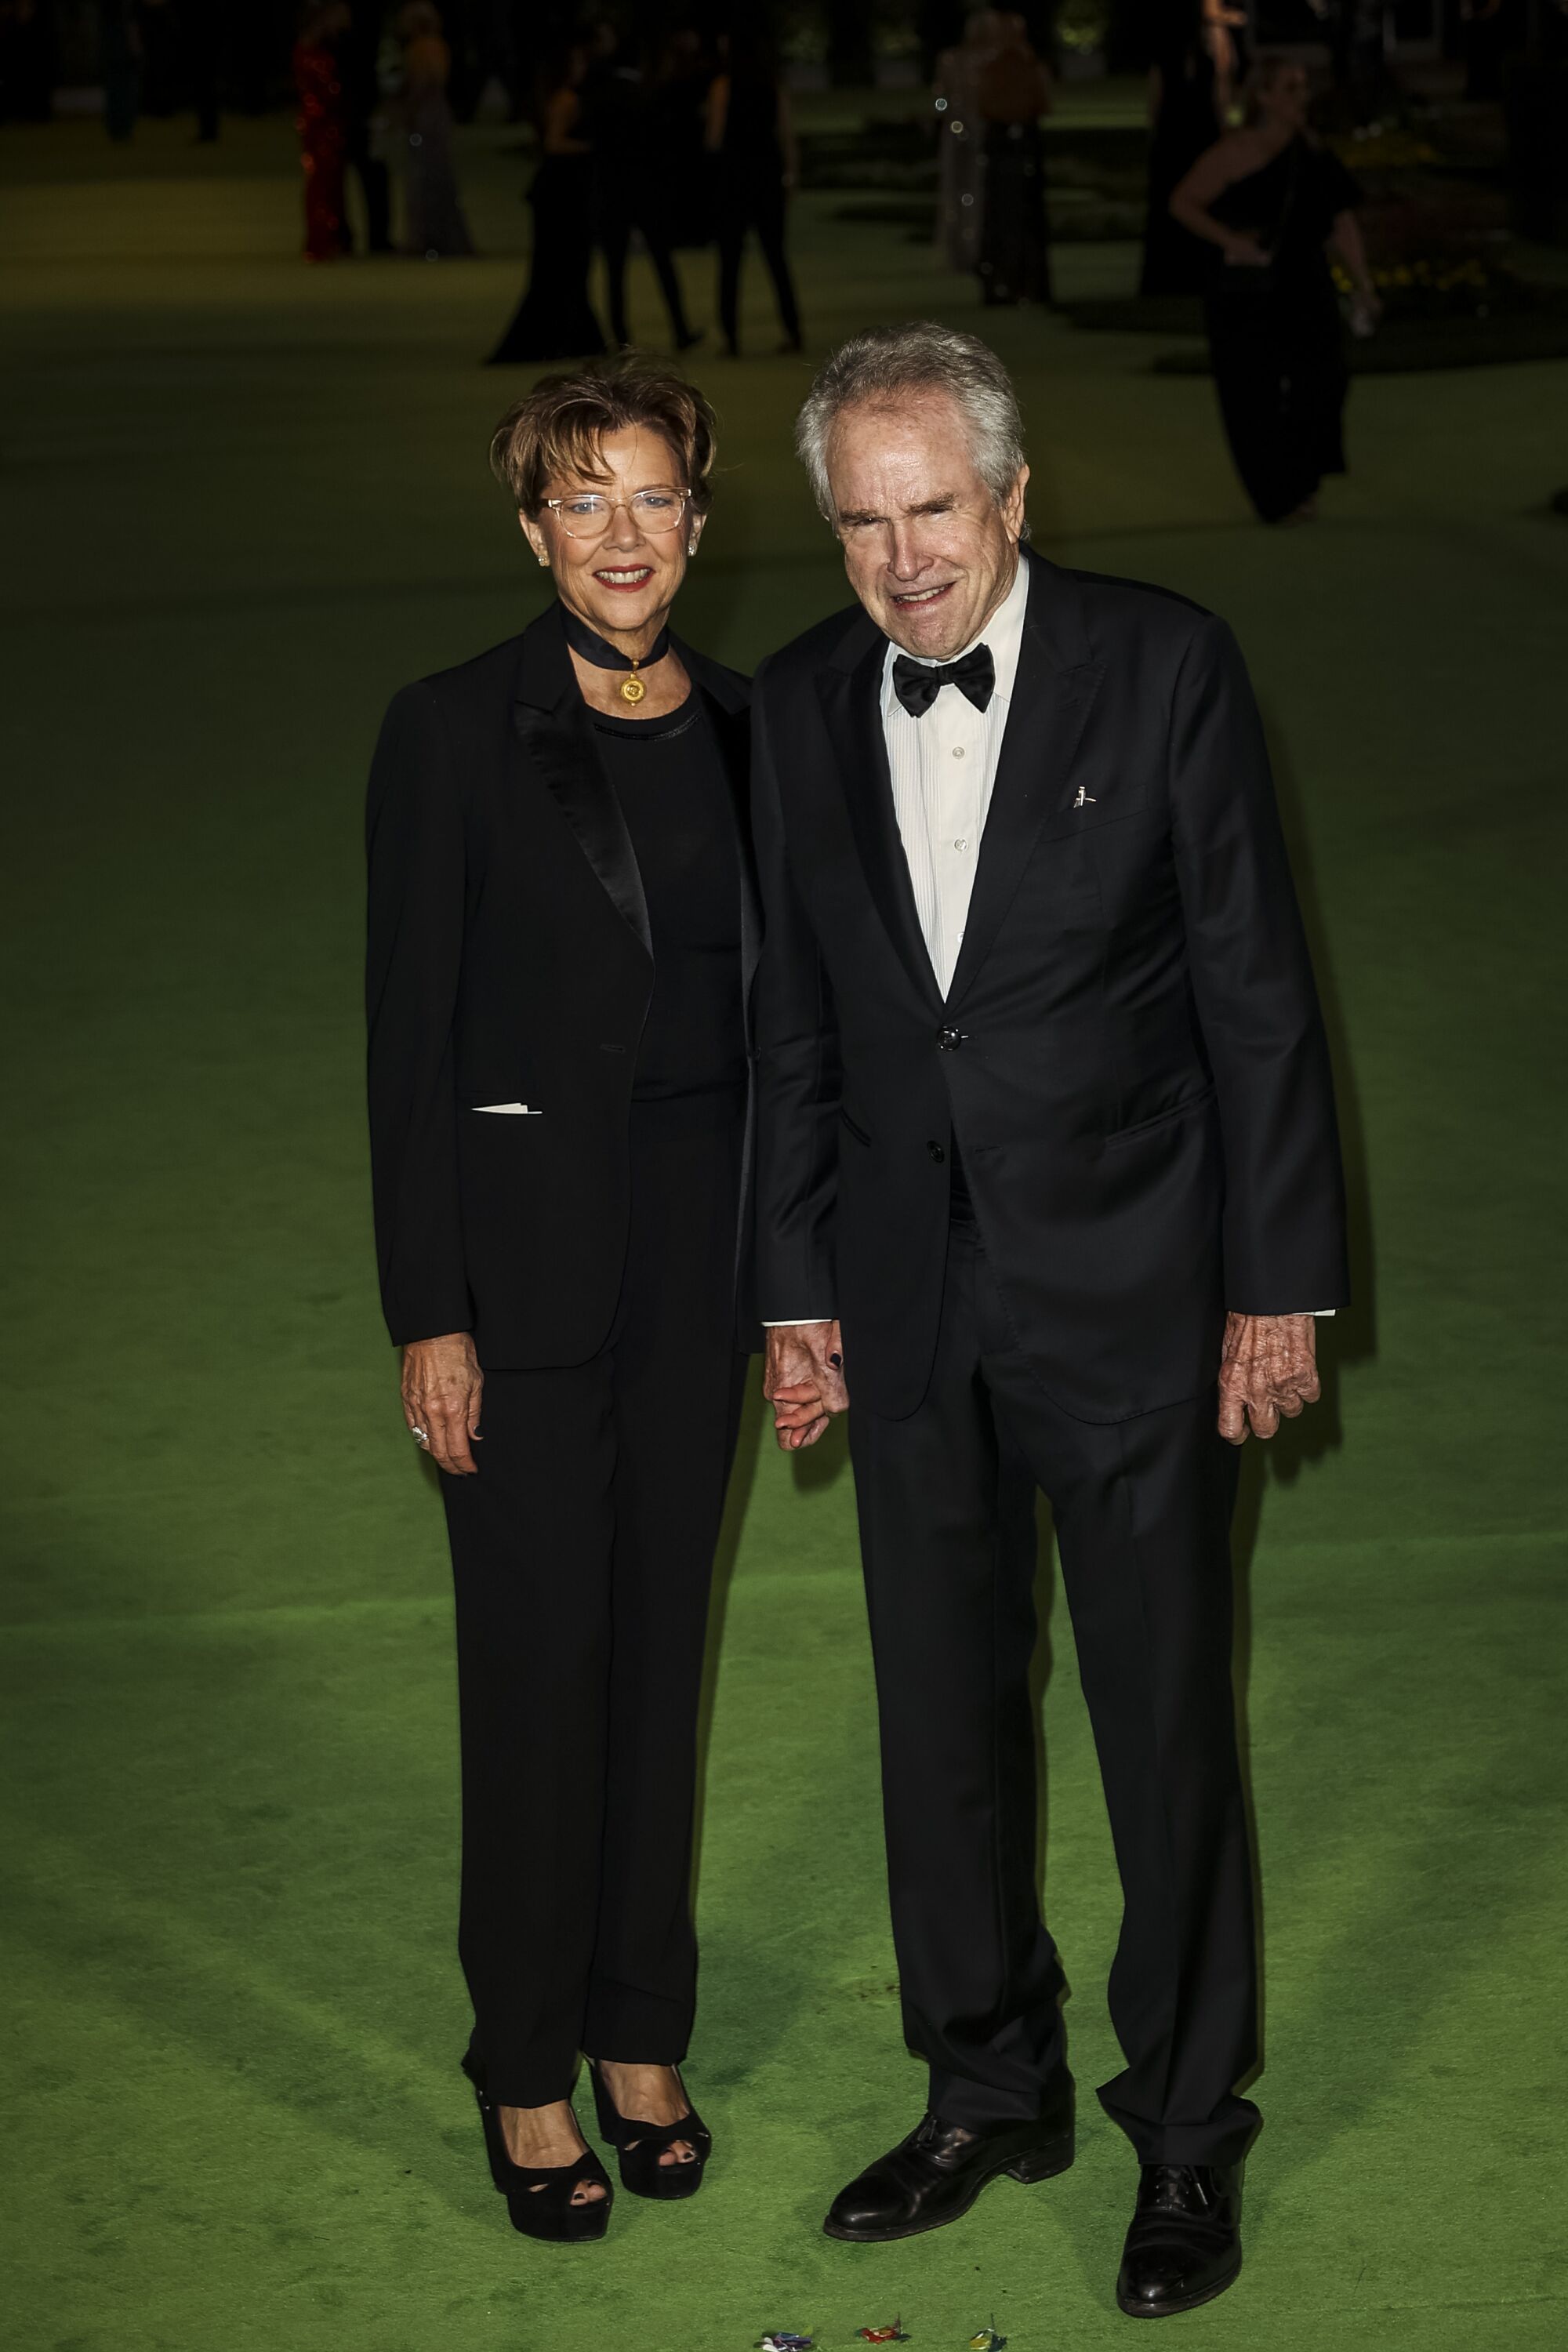 A woman in a black suit and a man in a black tuxedo posing on a green carpet